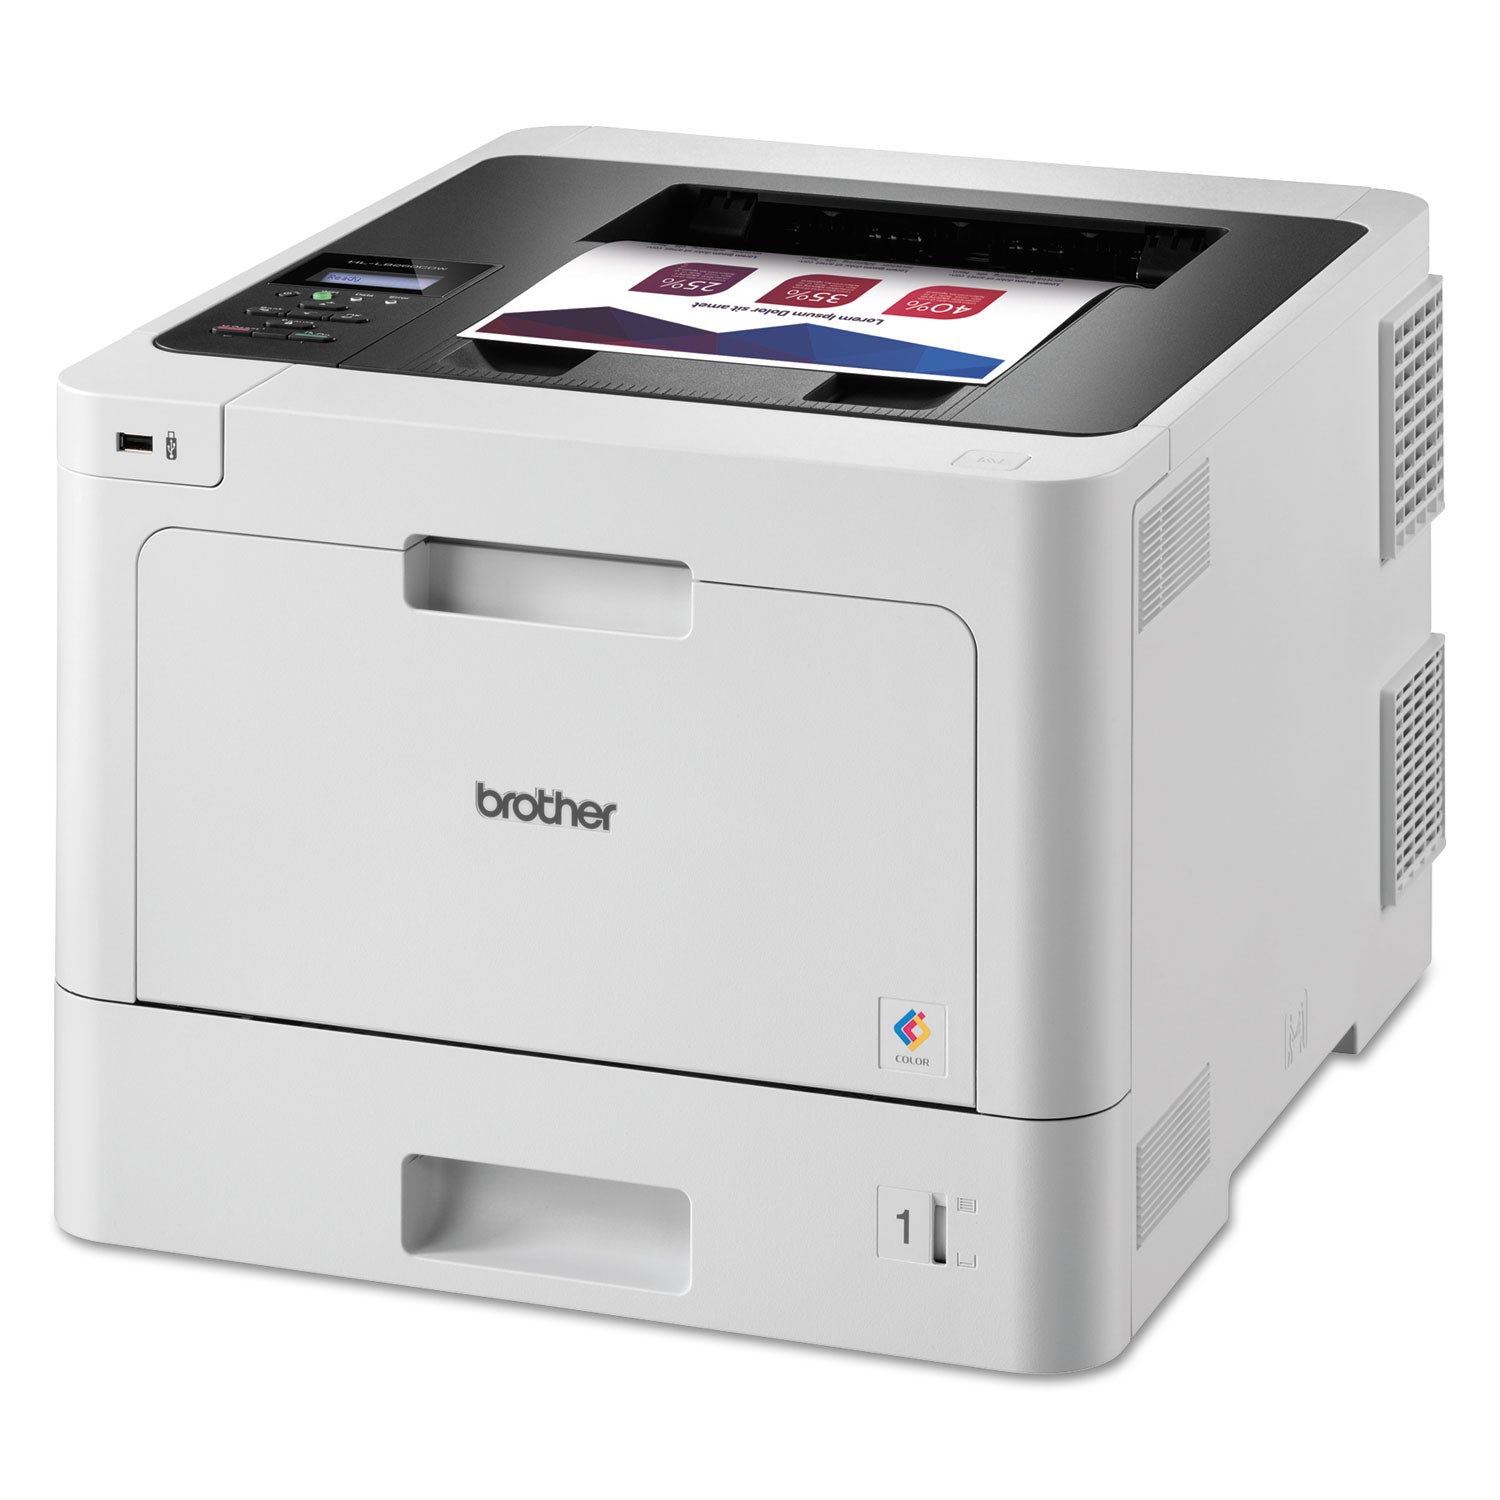 hll8260cdw-business-color-laser-printer-with-duplex-printing-and-wireless-networking_brthll8260cdw - 2